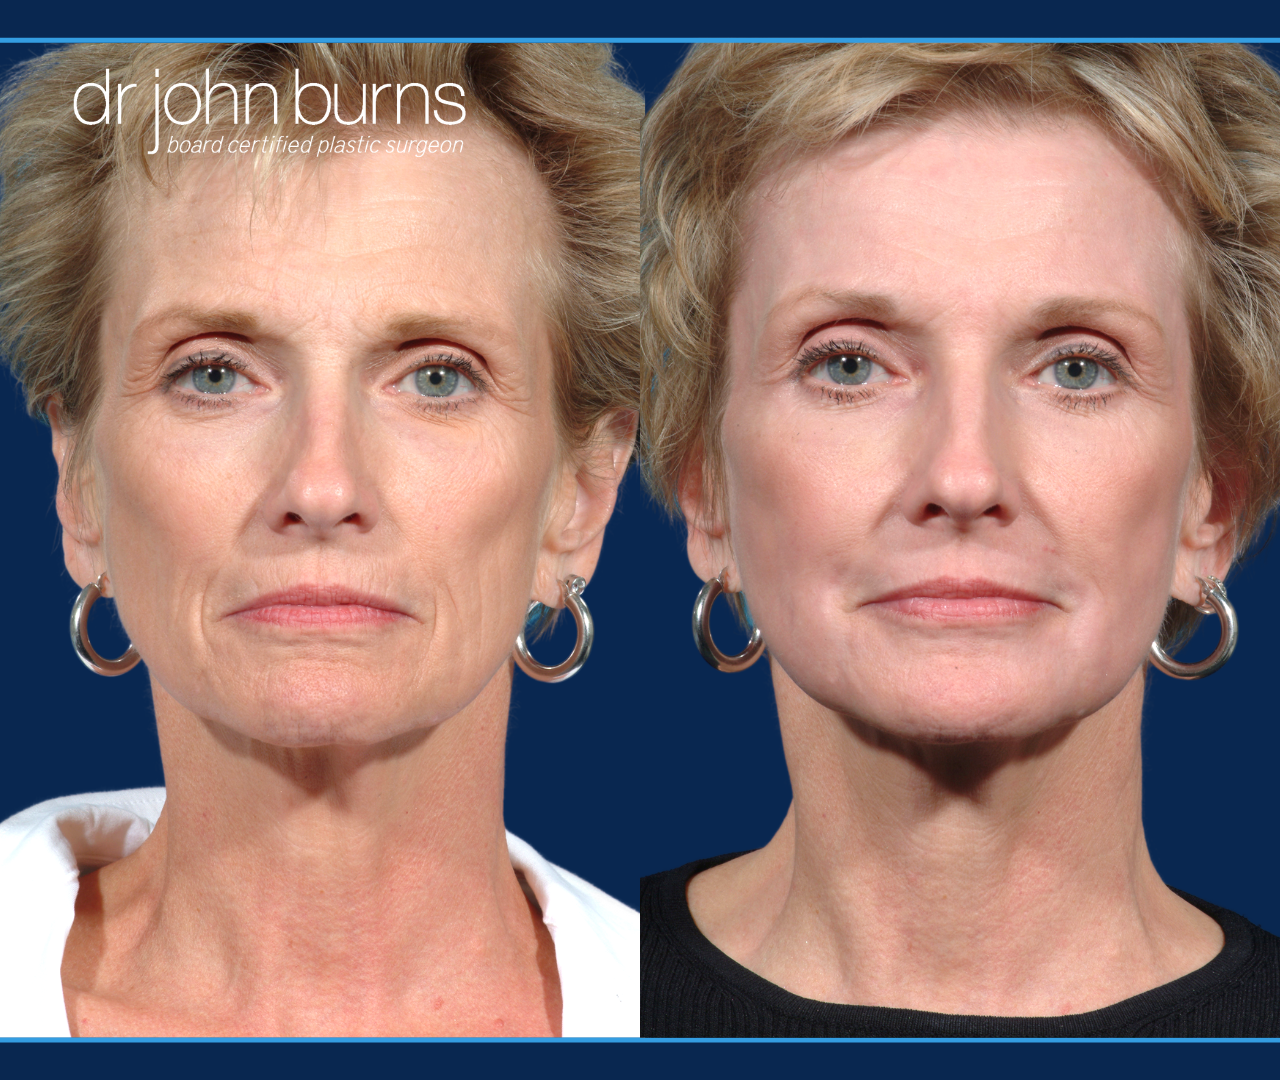 Before and after laser skin resurfacing by Dr. John Burns